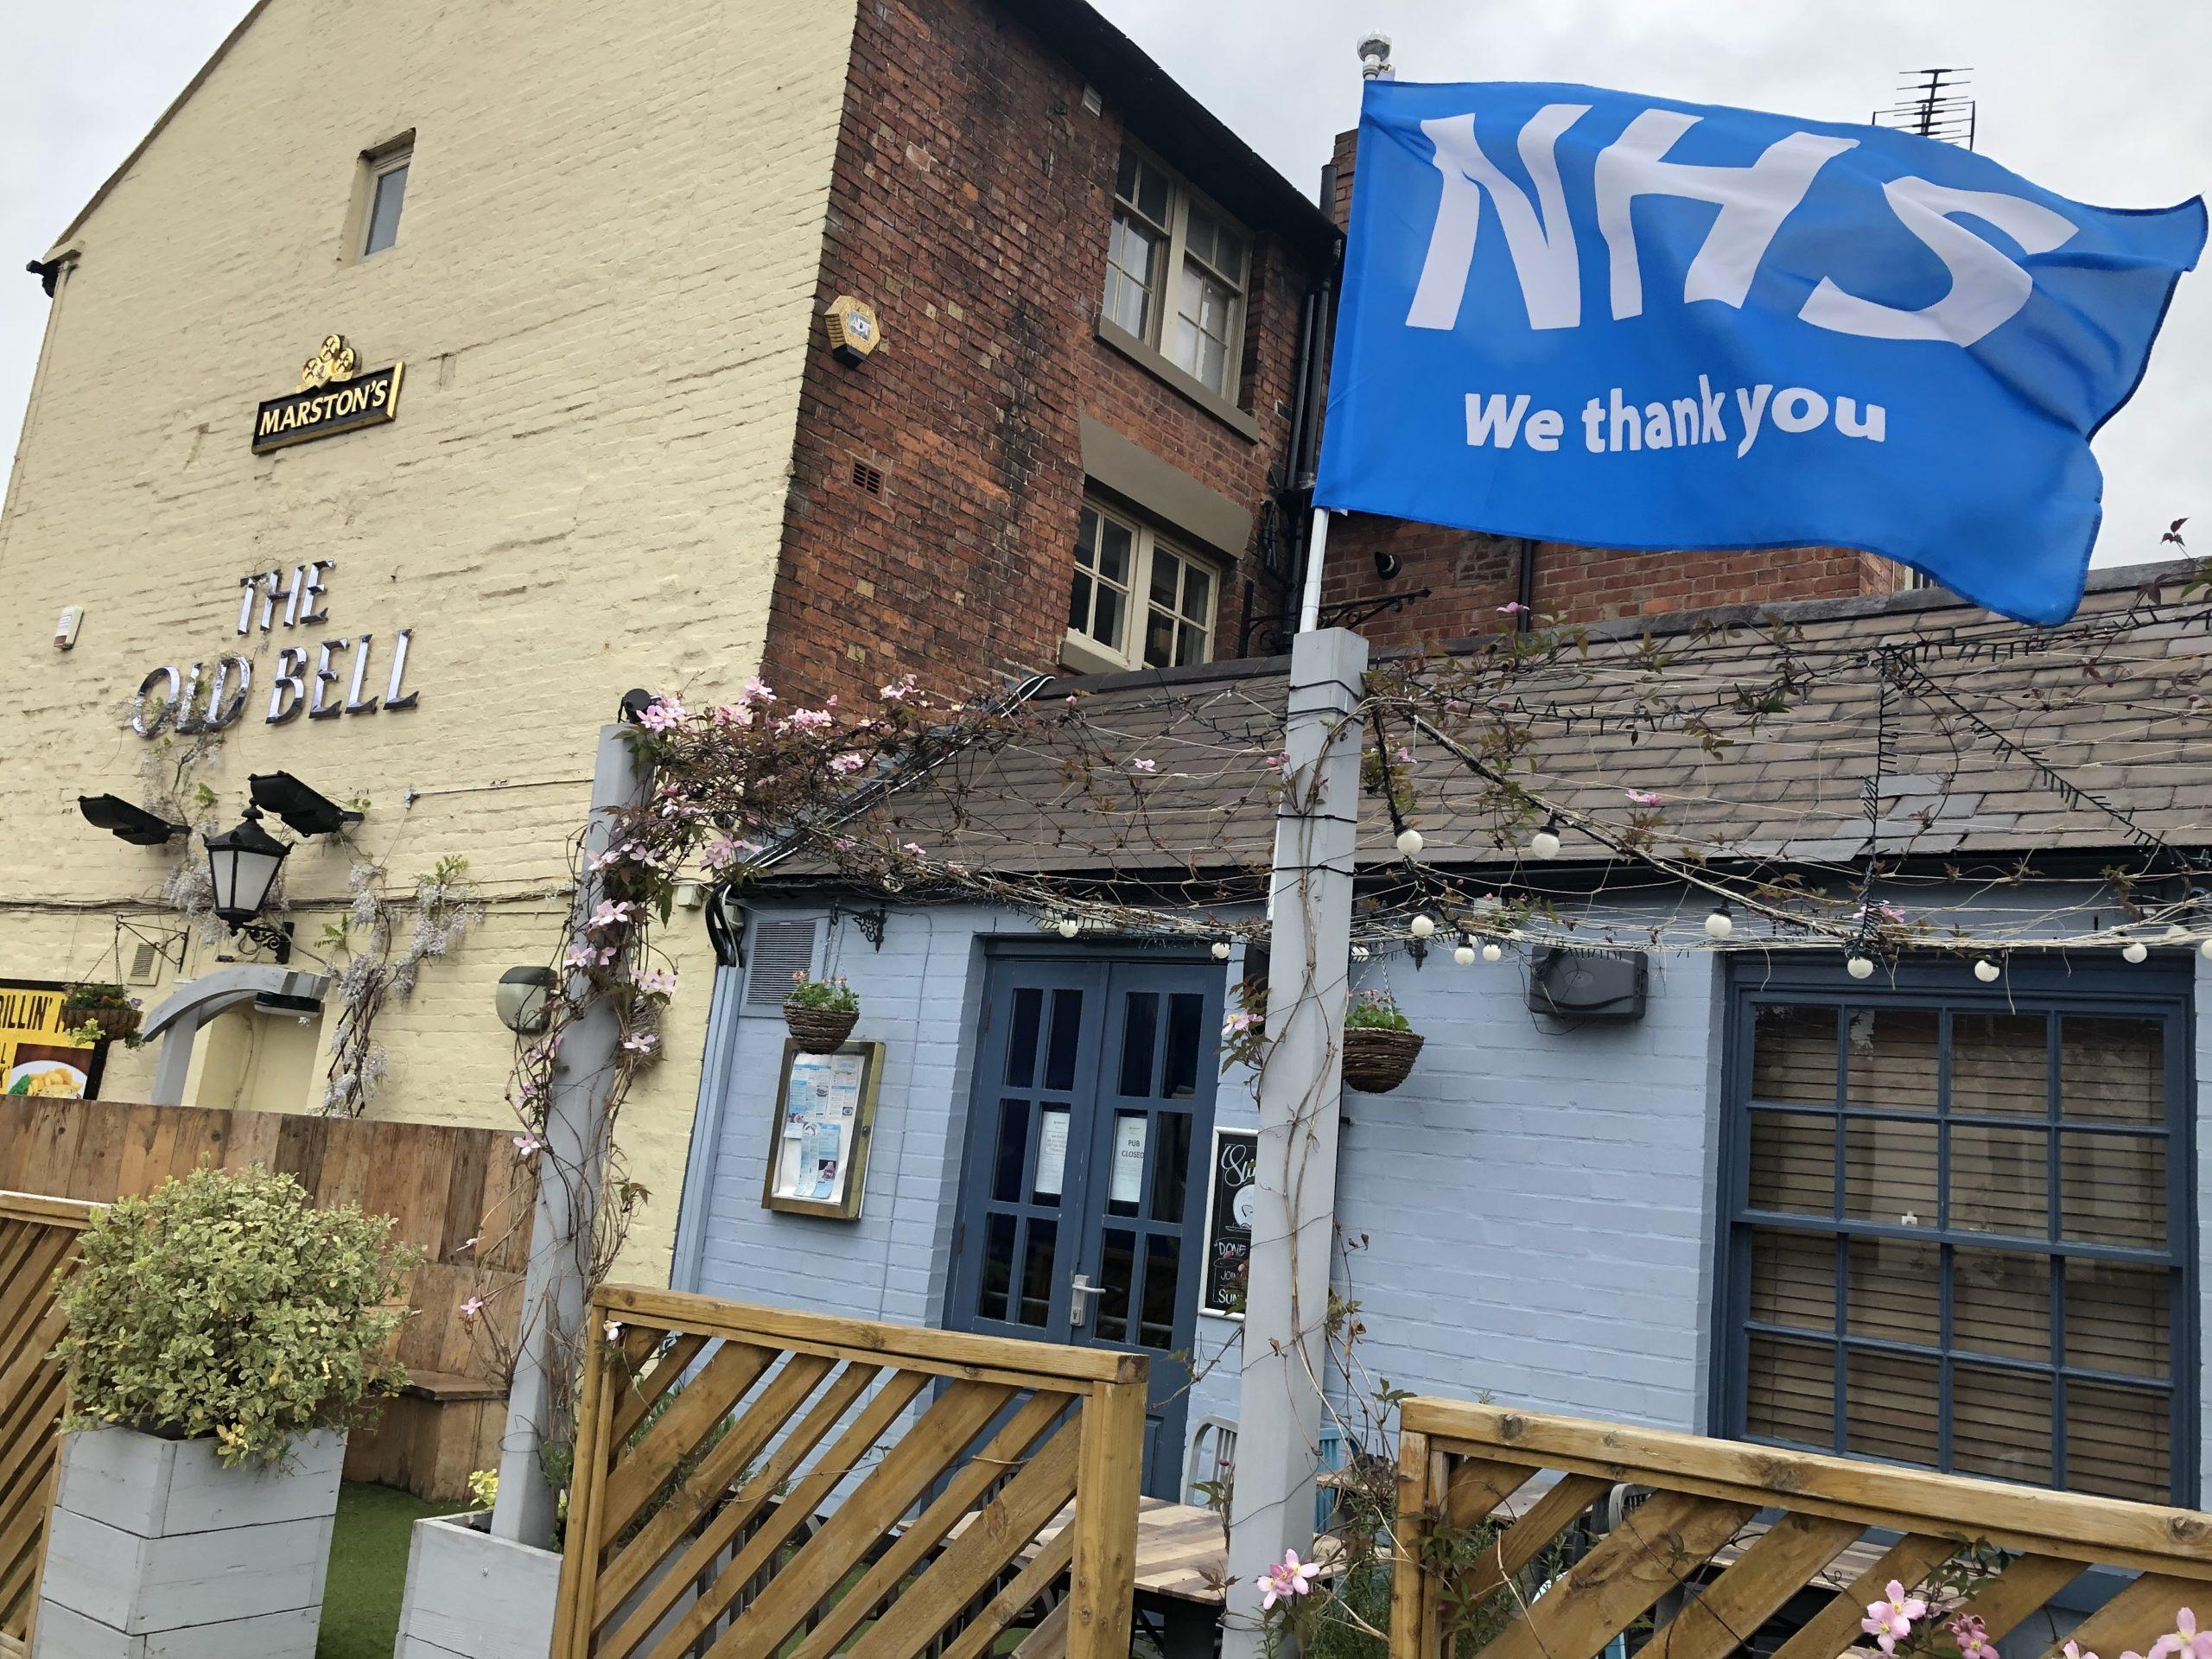 "NHS we thank you" flag outside Old Bell pub.